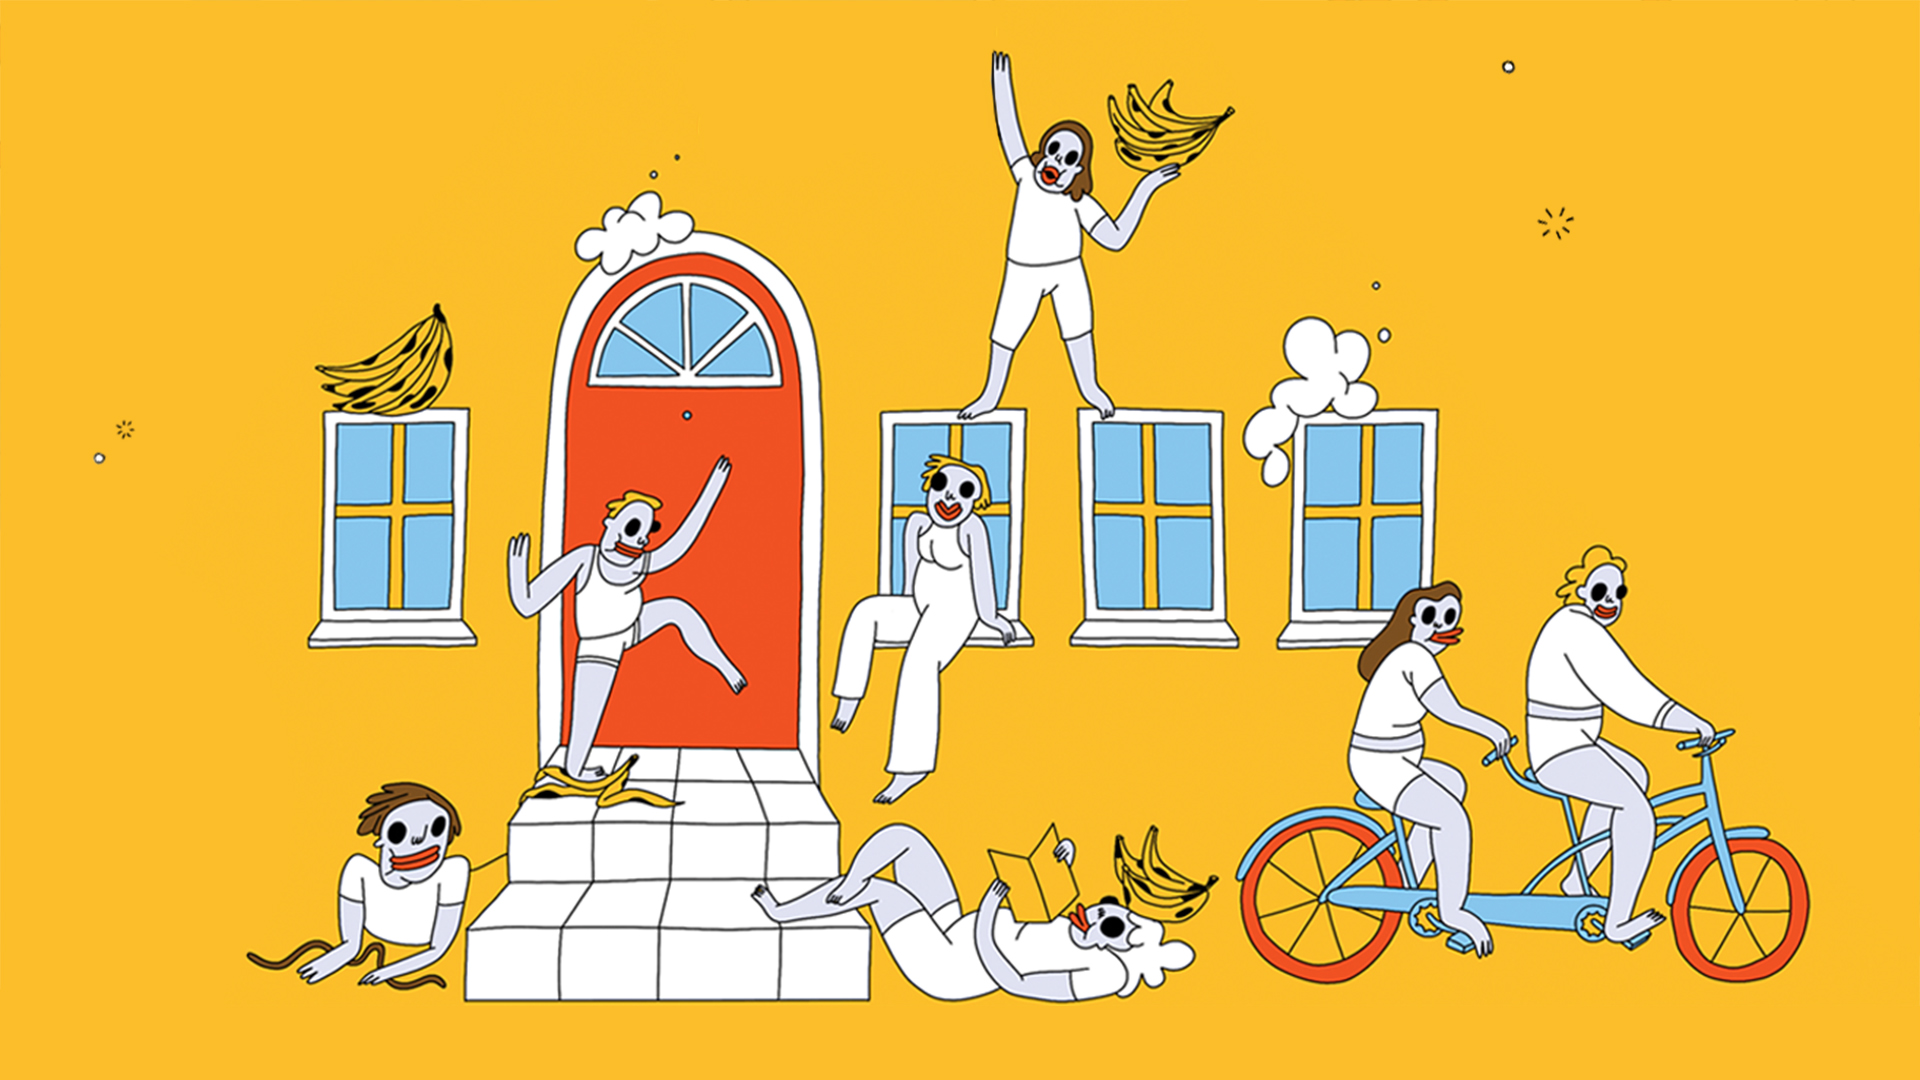 Illustration of people outside a yellow house with a red door, they are on bikes and holding bananas and lounging around.